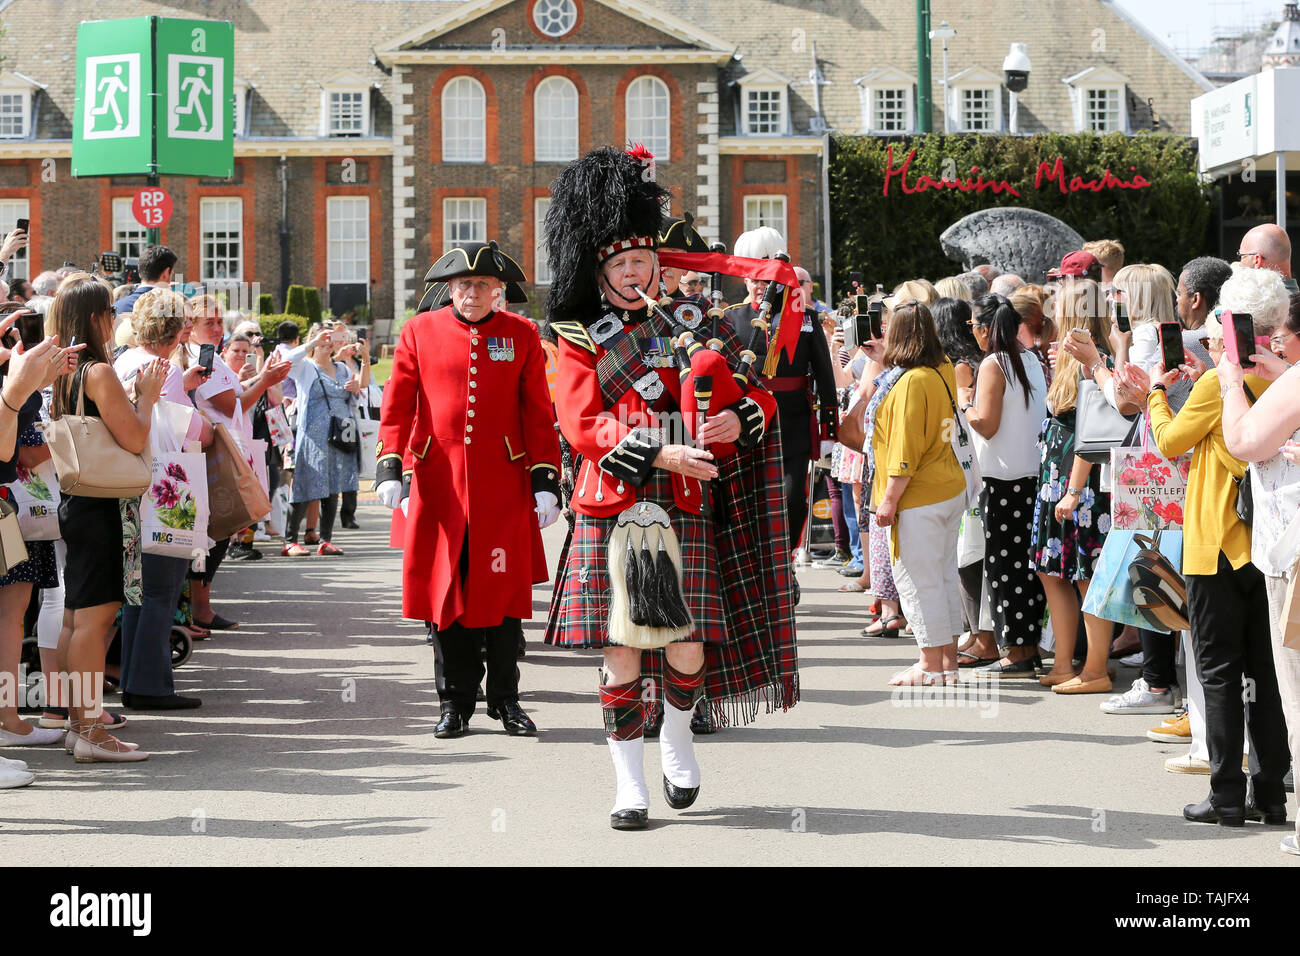 London, UK. 25th May 2019. A Scottish bagpiper leads a Chelsea Pensioners march at the RHS Chelsea Flower Show on the final day of the show. The Royal Horticultural Society Chelsea Flower Show is an annual garden show held in the grounds of the Royal Hospital Chelsea in West London since 1913.  Credit: Dinendra Haria/Alamy Live News Stock Photo